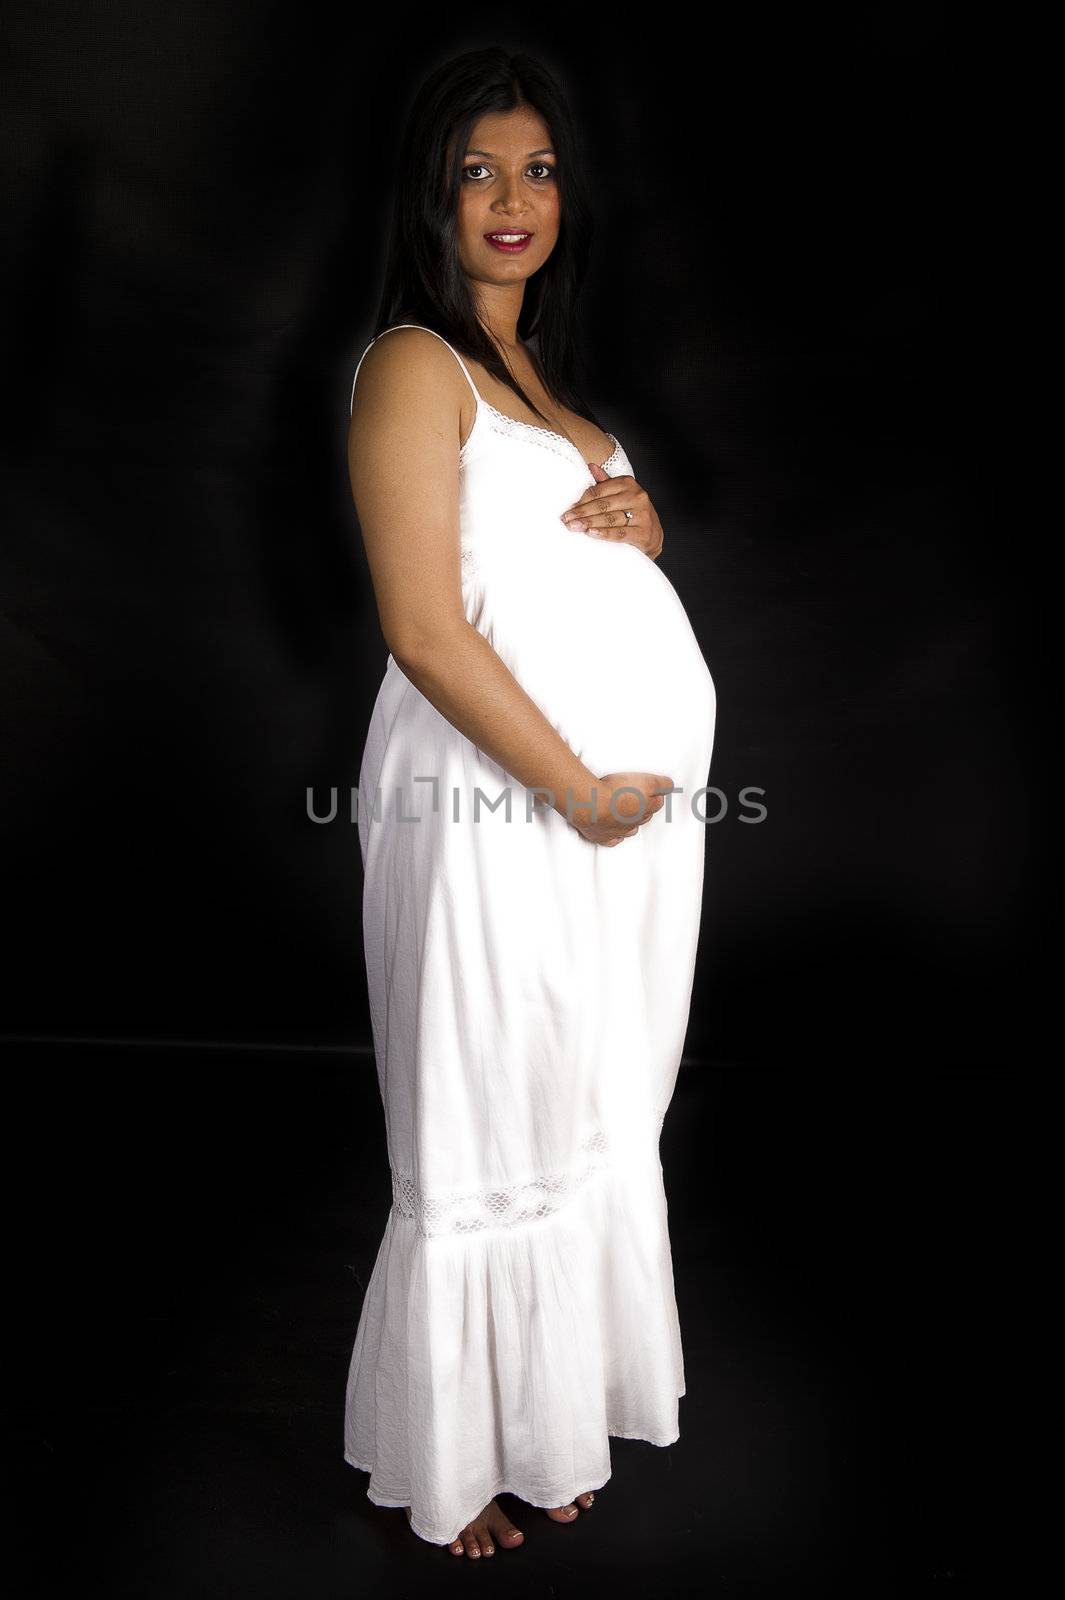 A beautiful pregnant Indian woman in white dress and angel wings smiling on black backdrop